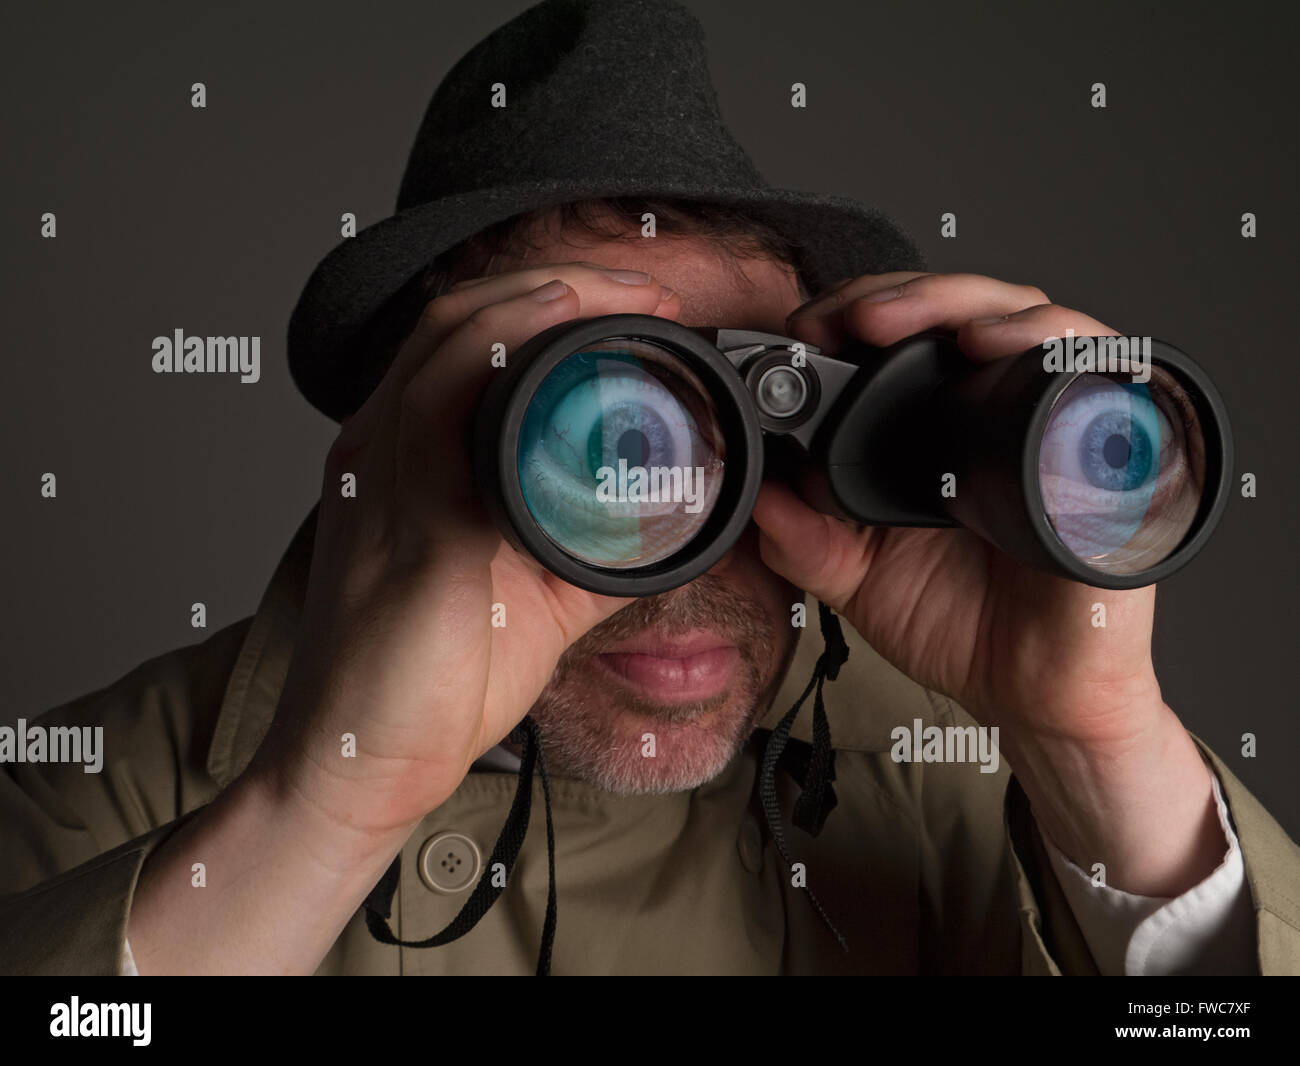 Photograph of a man in trench coat and hat looking through binoculars with huge, cartoonish eyes seen in the lenses. Stock Photo